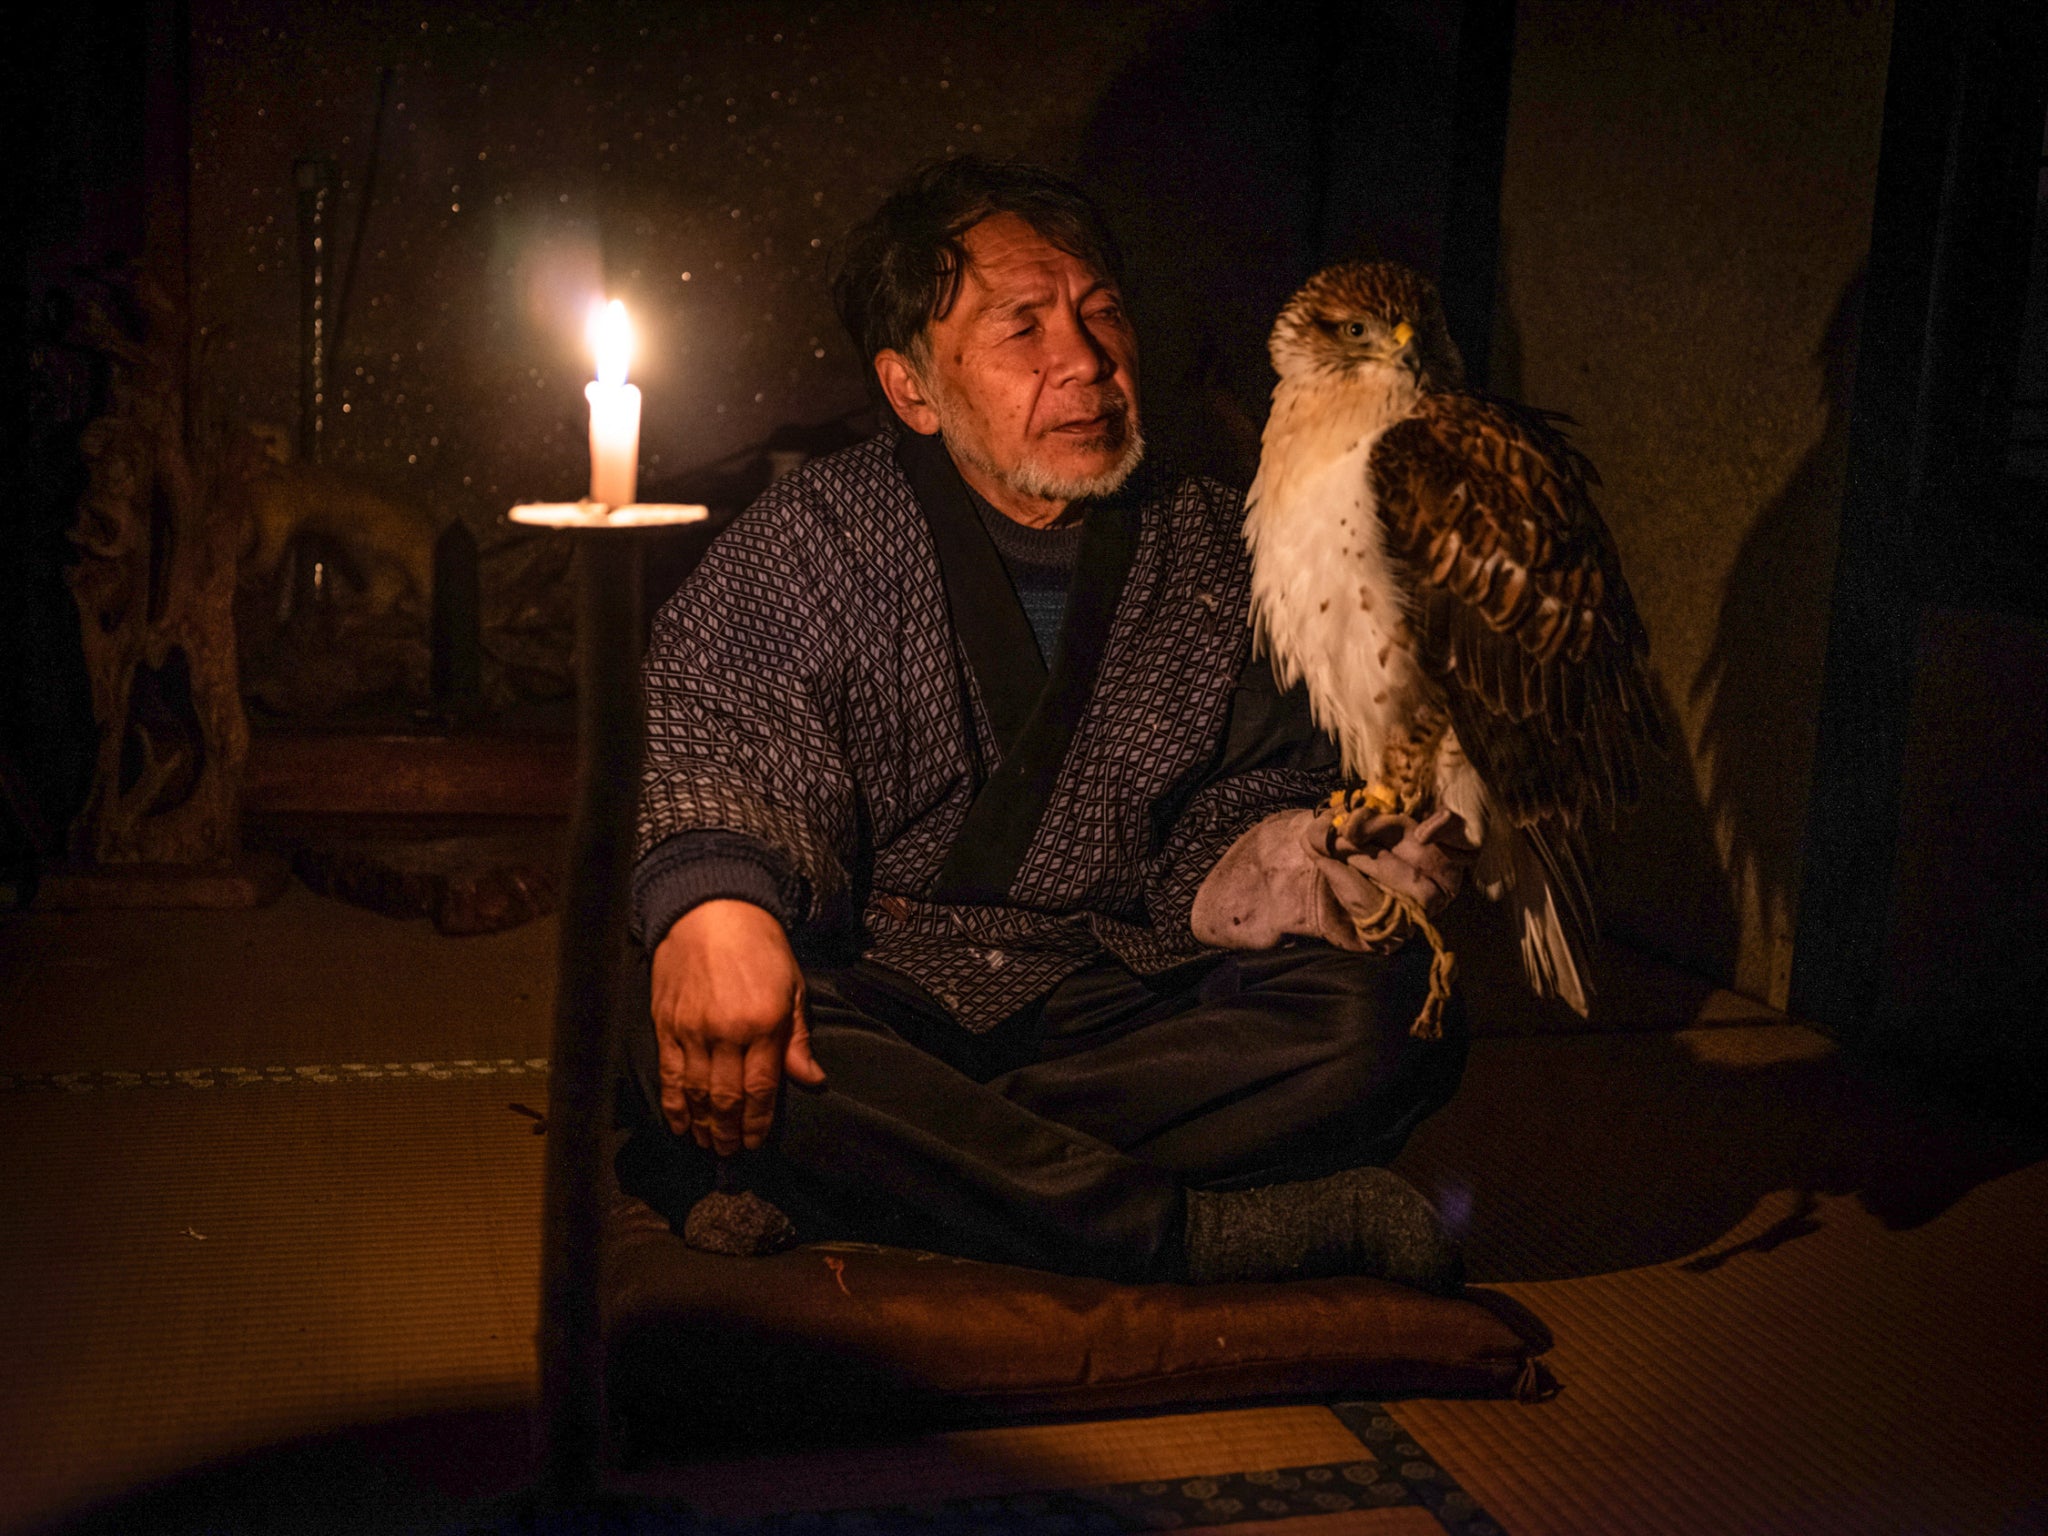 The first stages of “manning,” teaching a hawk to stay on their falconer’s arm, begins with acclimation in the dark. The second phase uses a room that’s dimly lit.